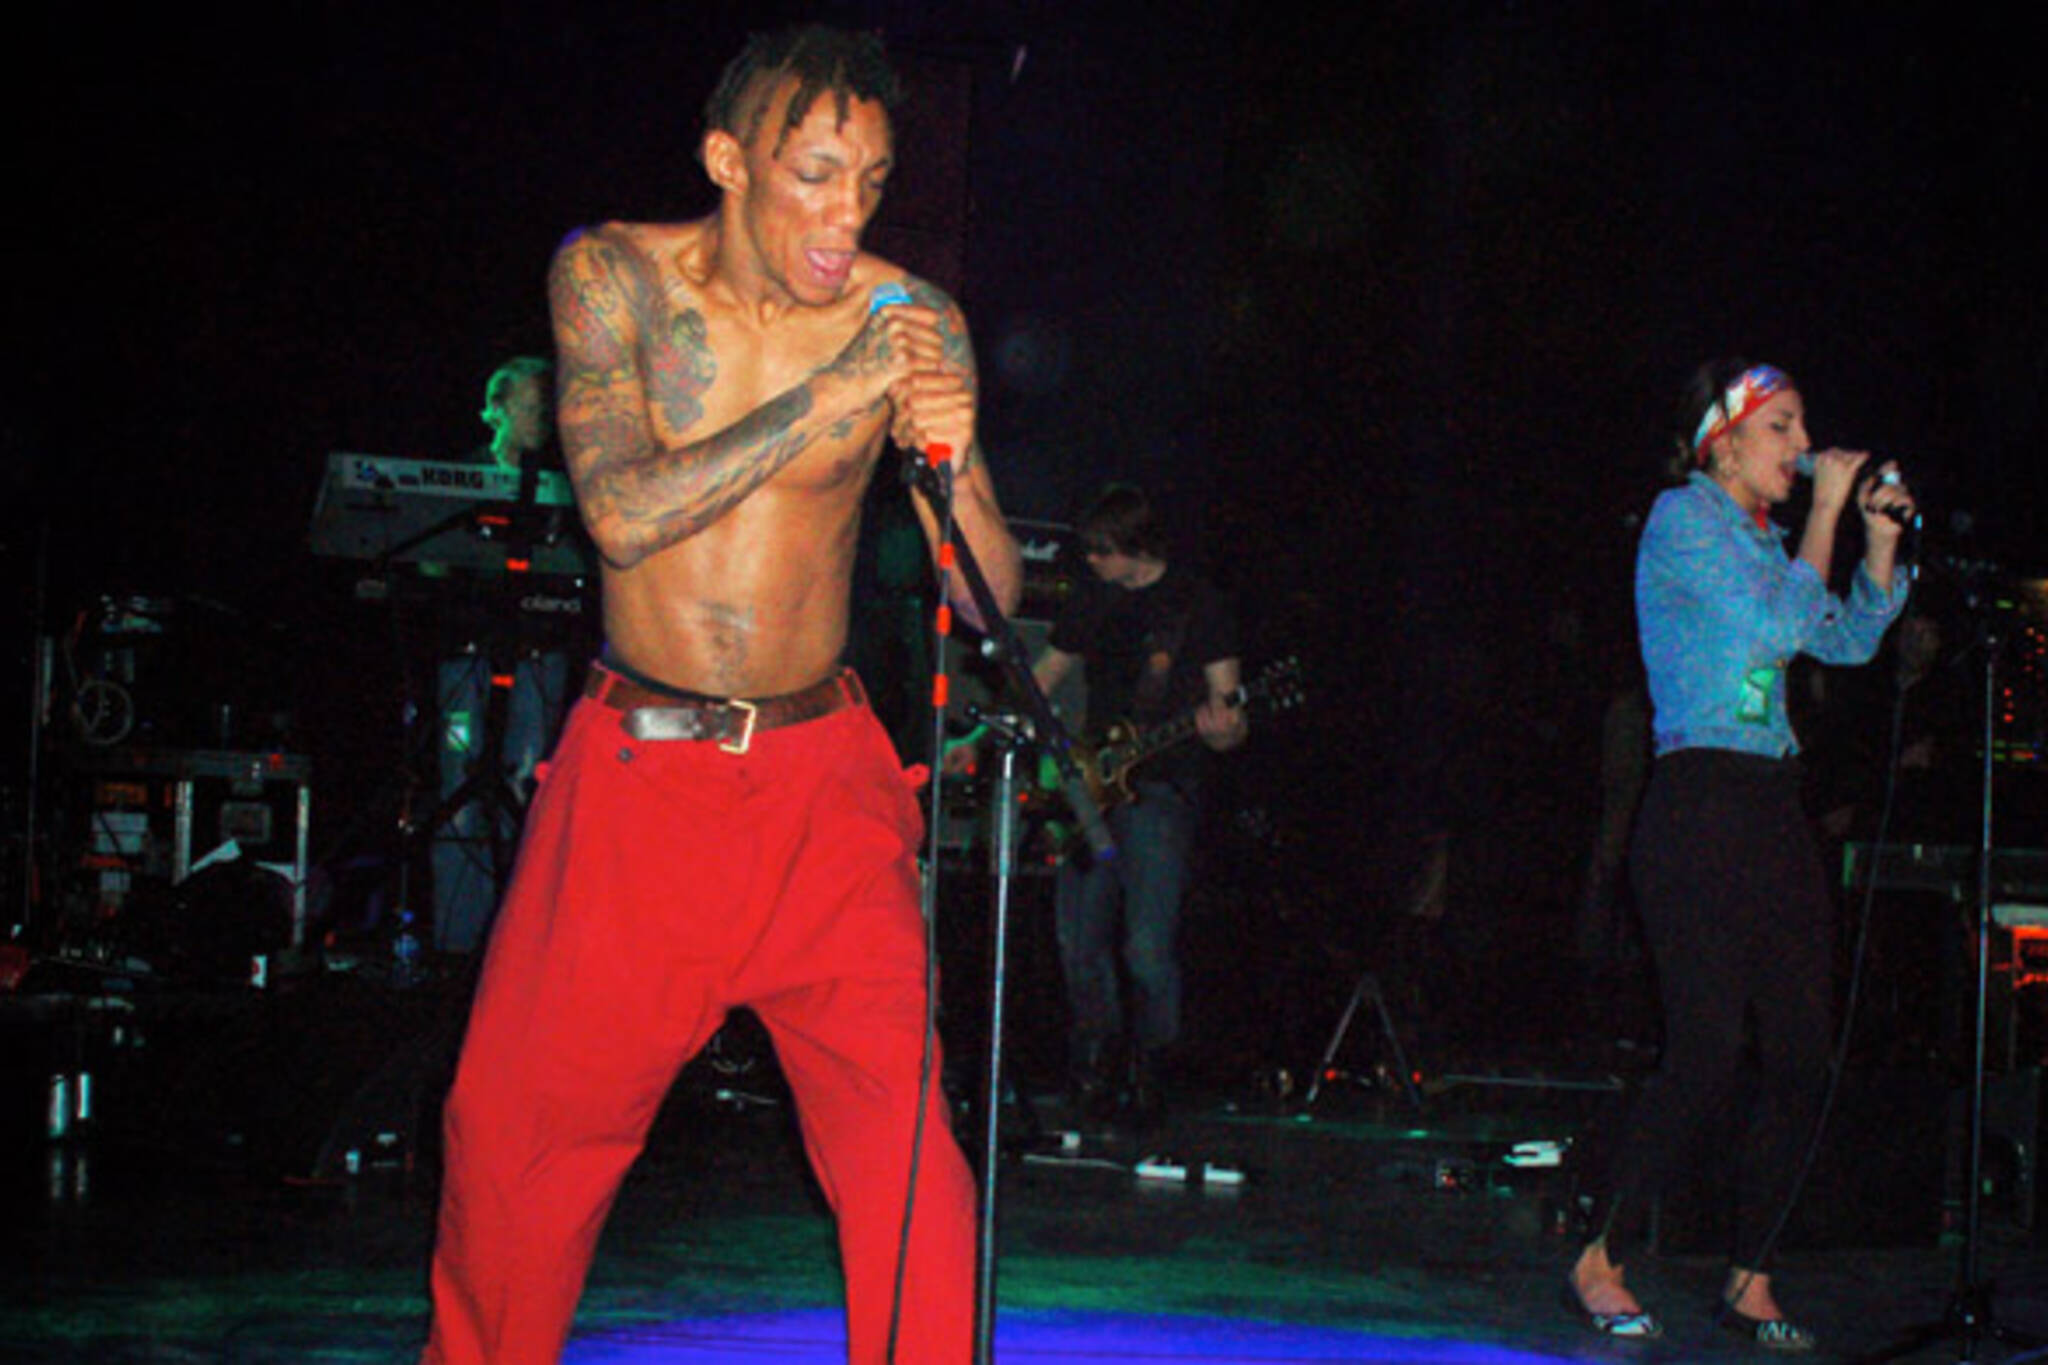 Tricky performing live